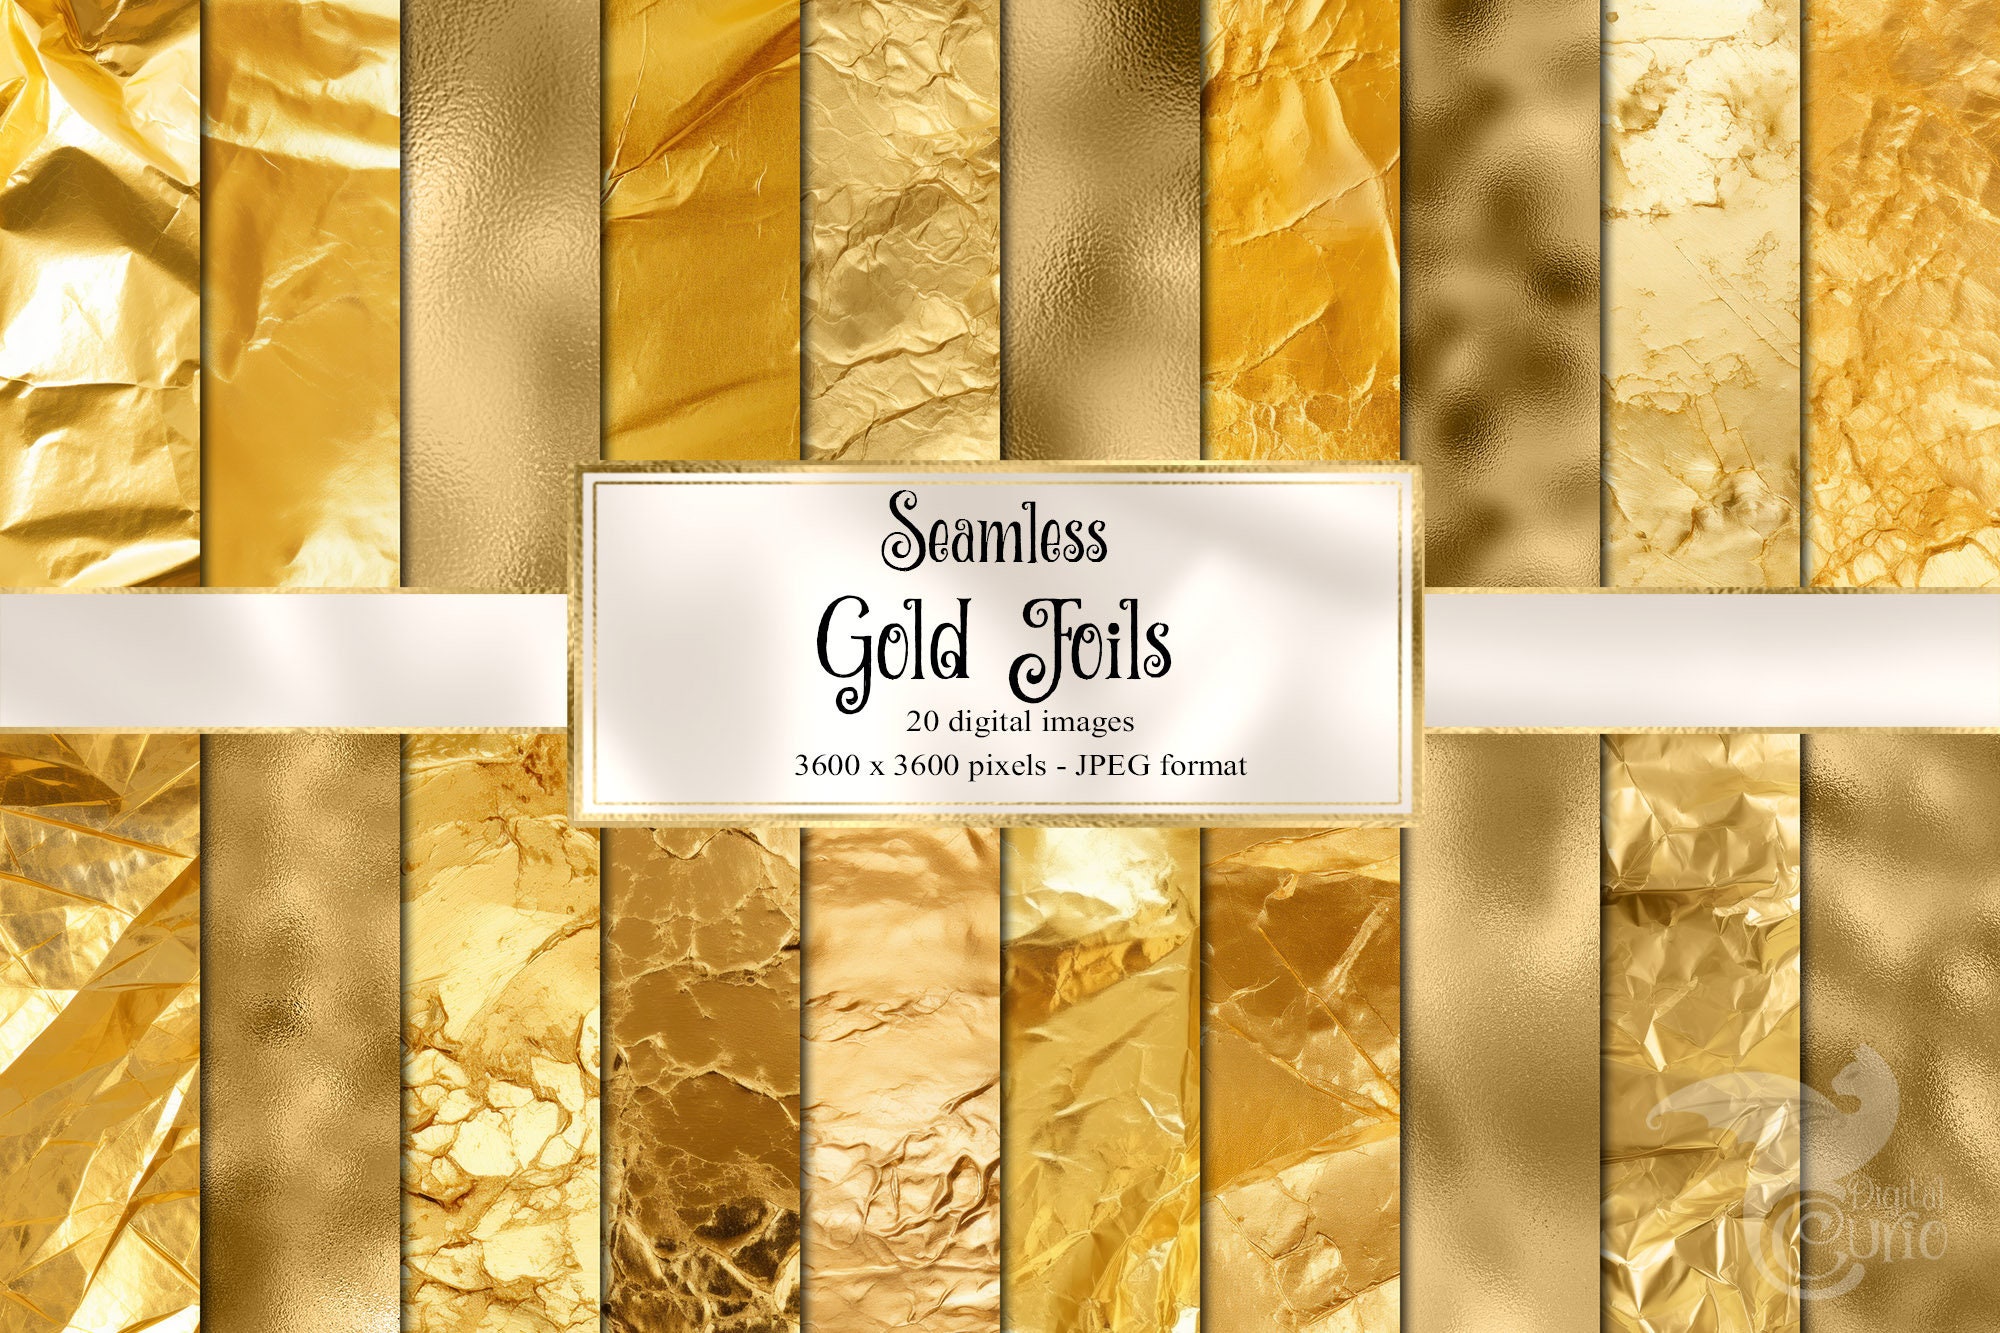 CLEARANCE Gold Tassels, individually wrapped